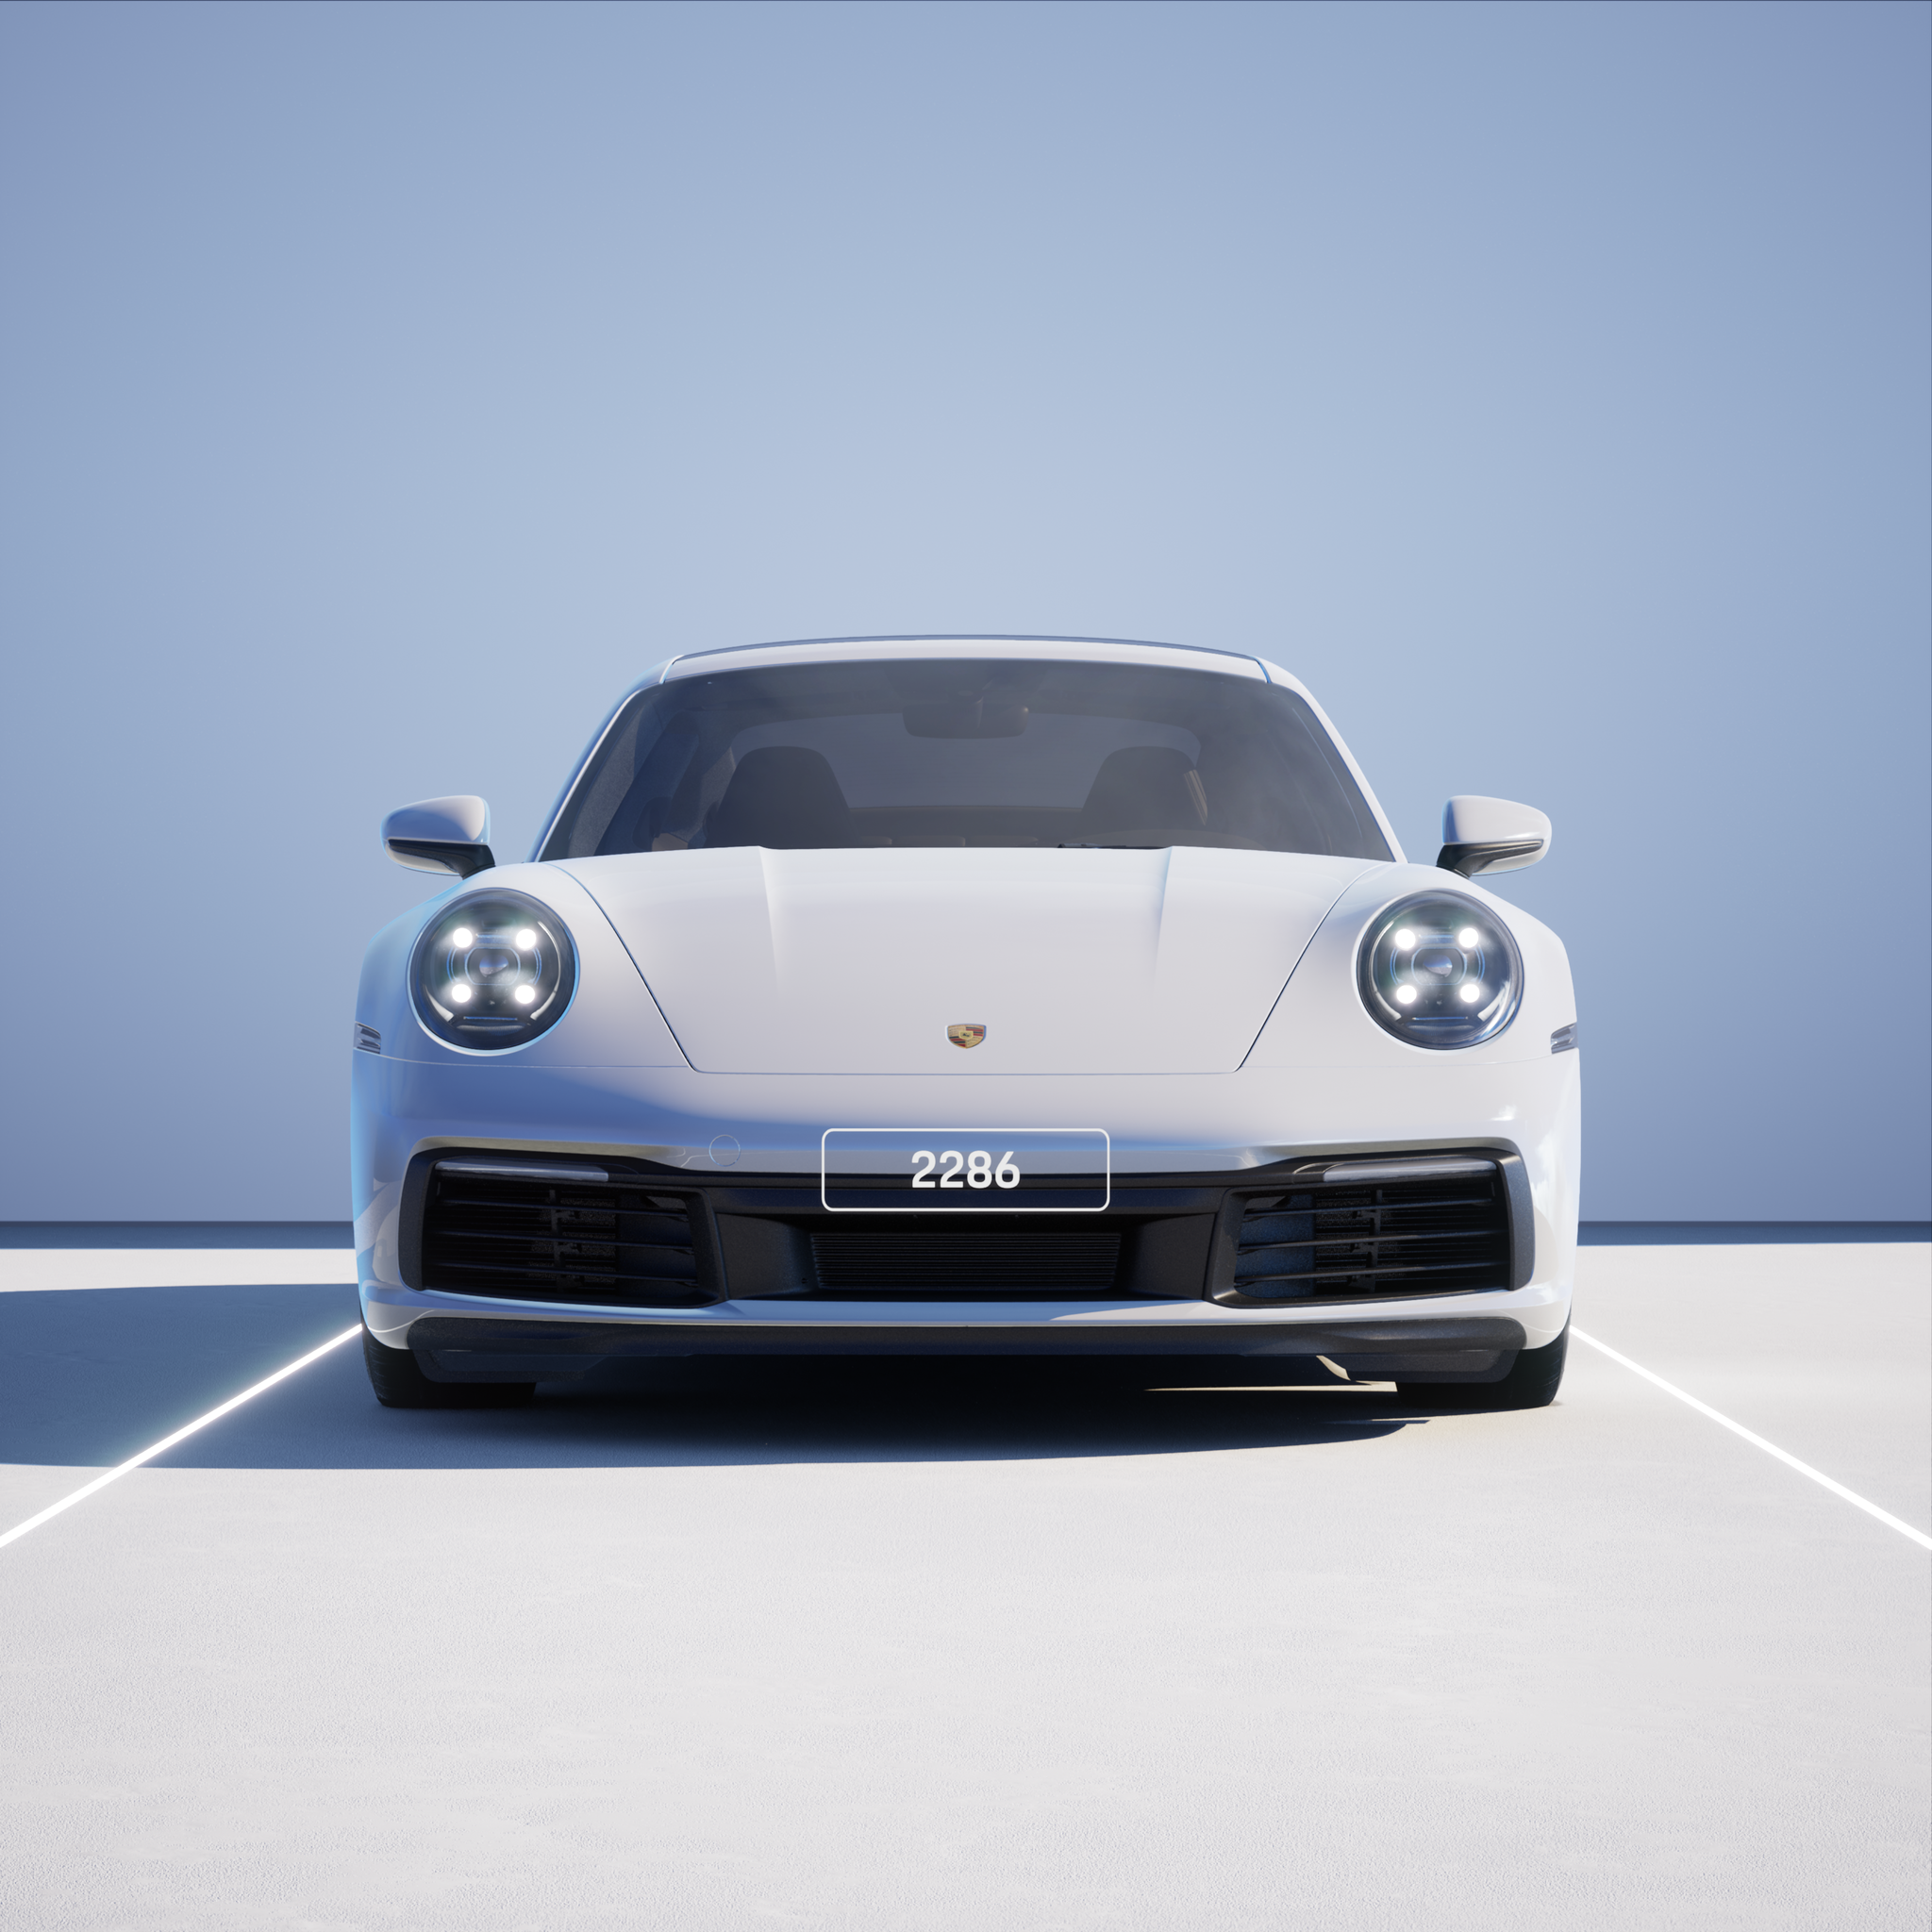 The PORSCHΞ 911 2286 image in phase